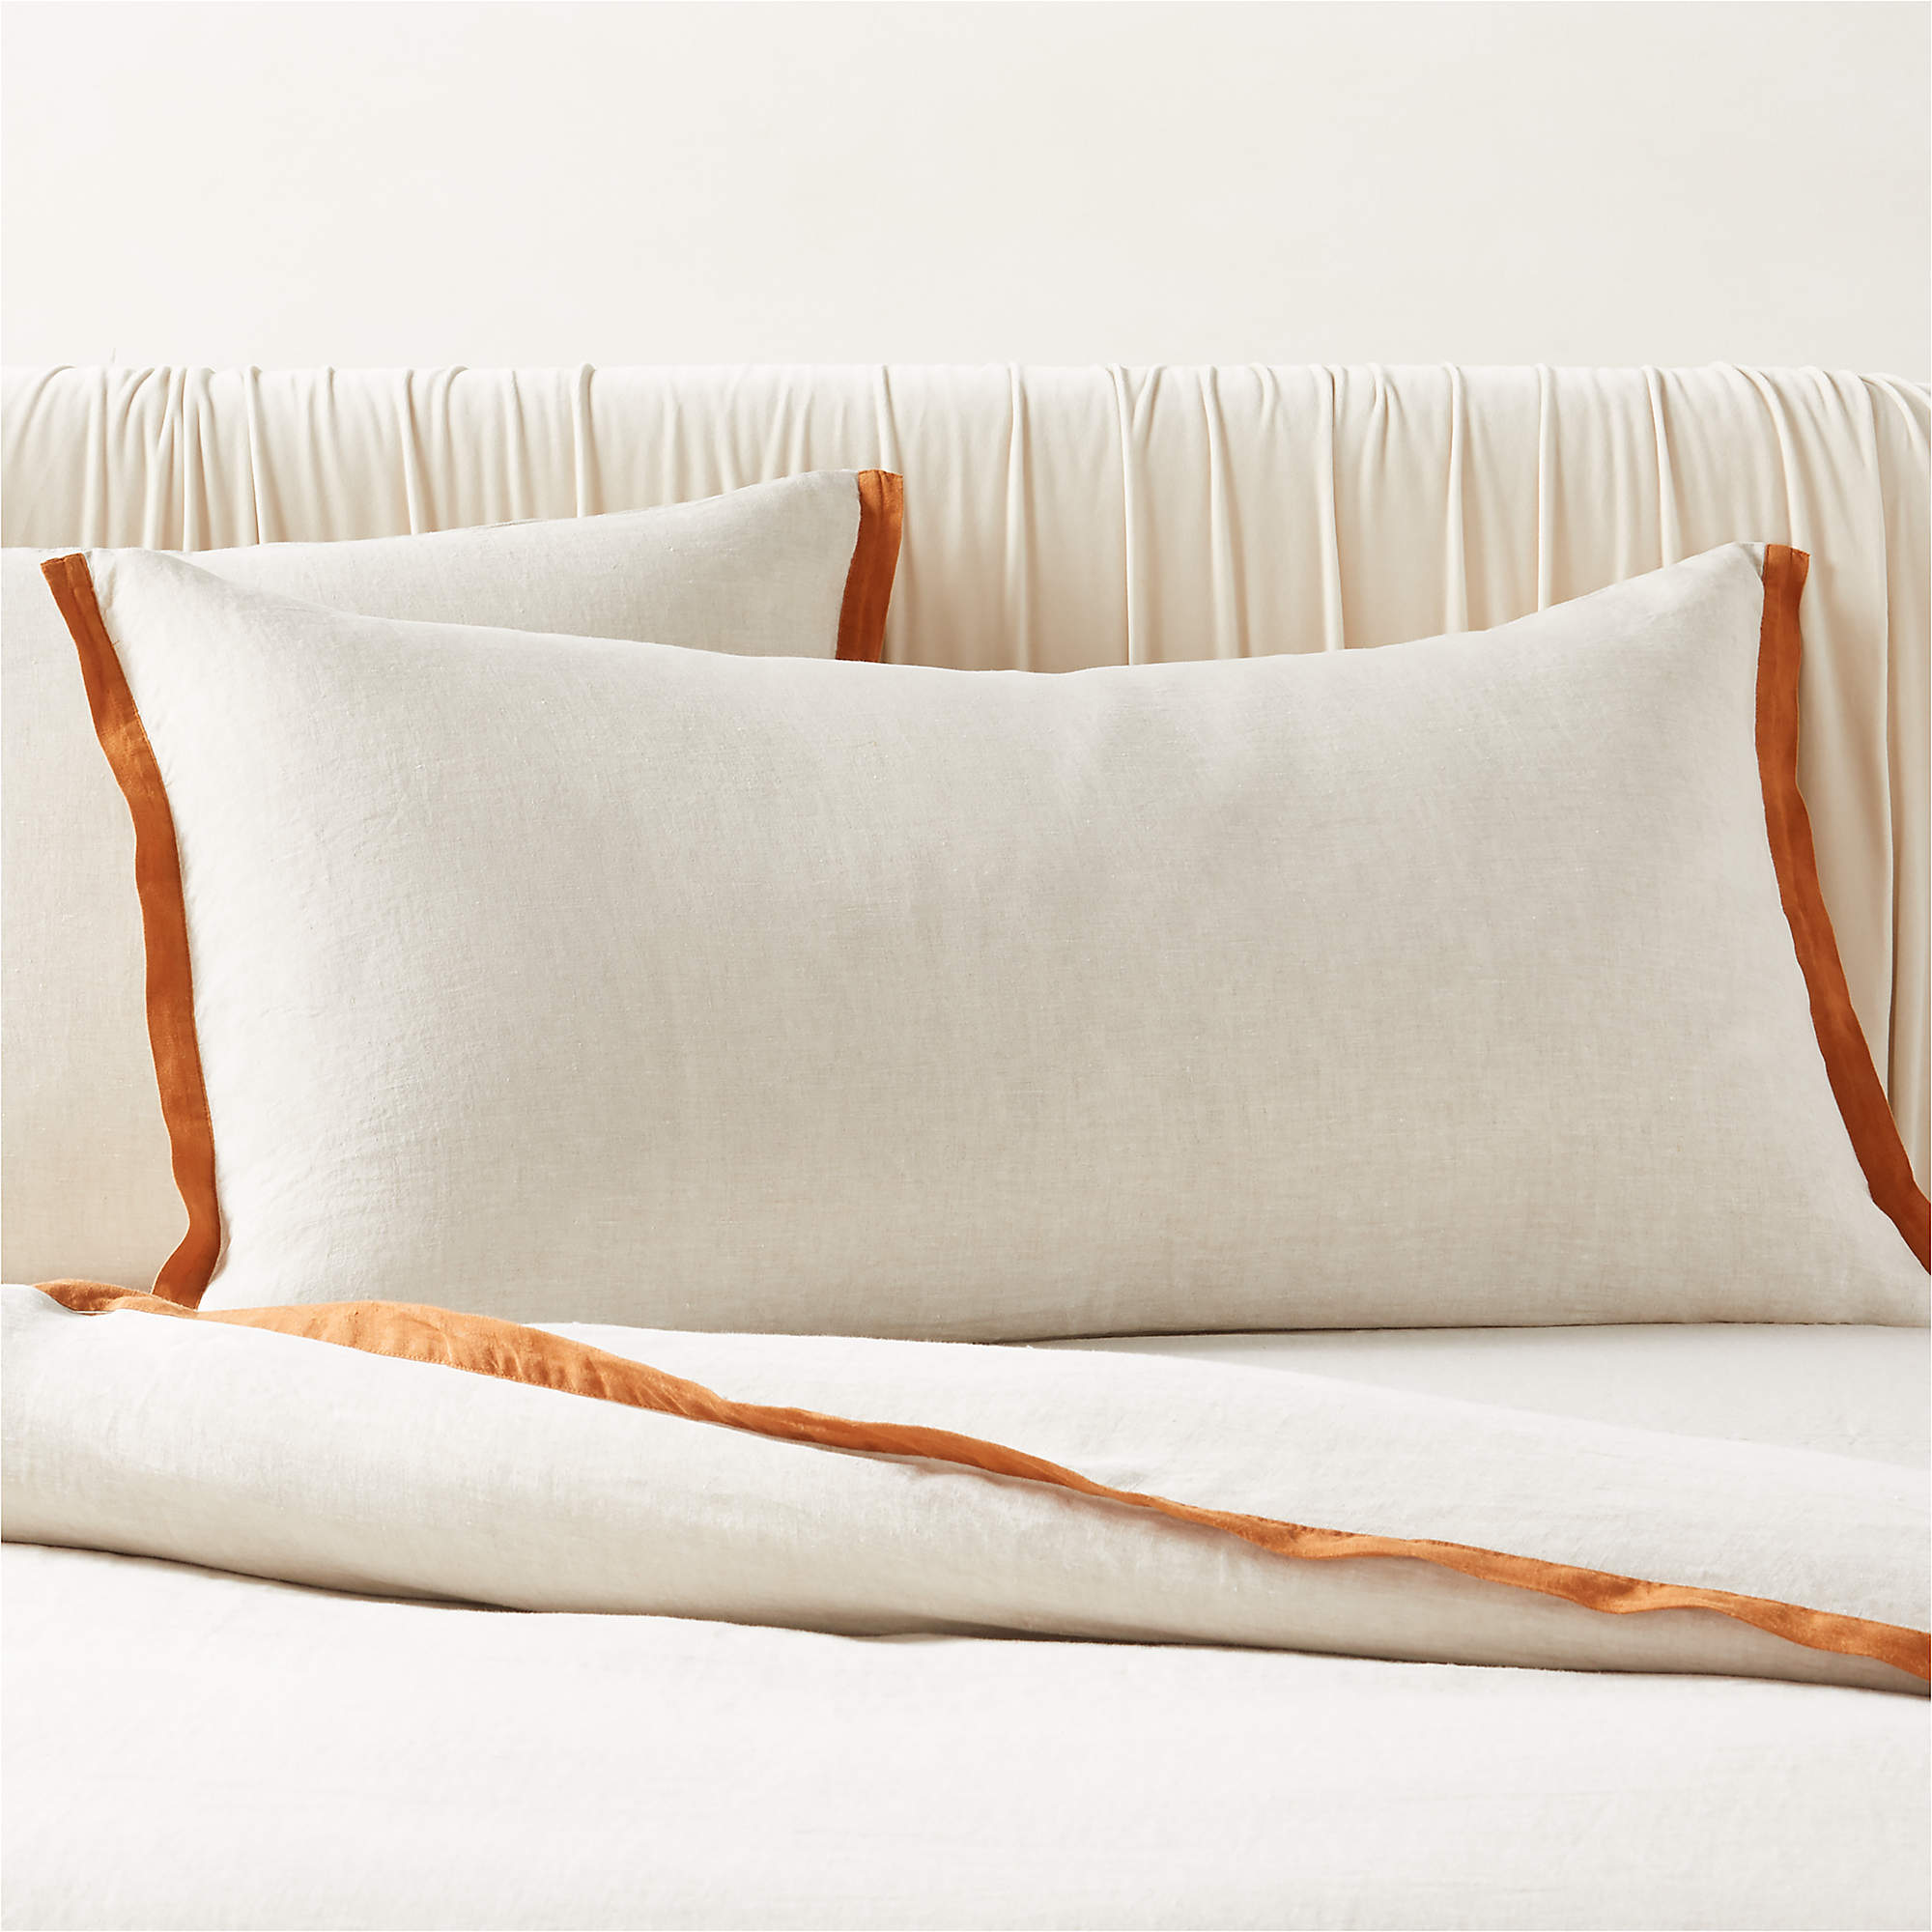 Shop BORDER EUROPEAN FLAX LINEN KING PILLOW SHAMS WITH COPPER BORDER SET OF 2 from CB2 on Openhaus